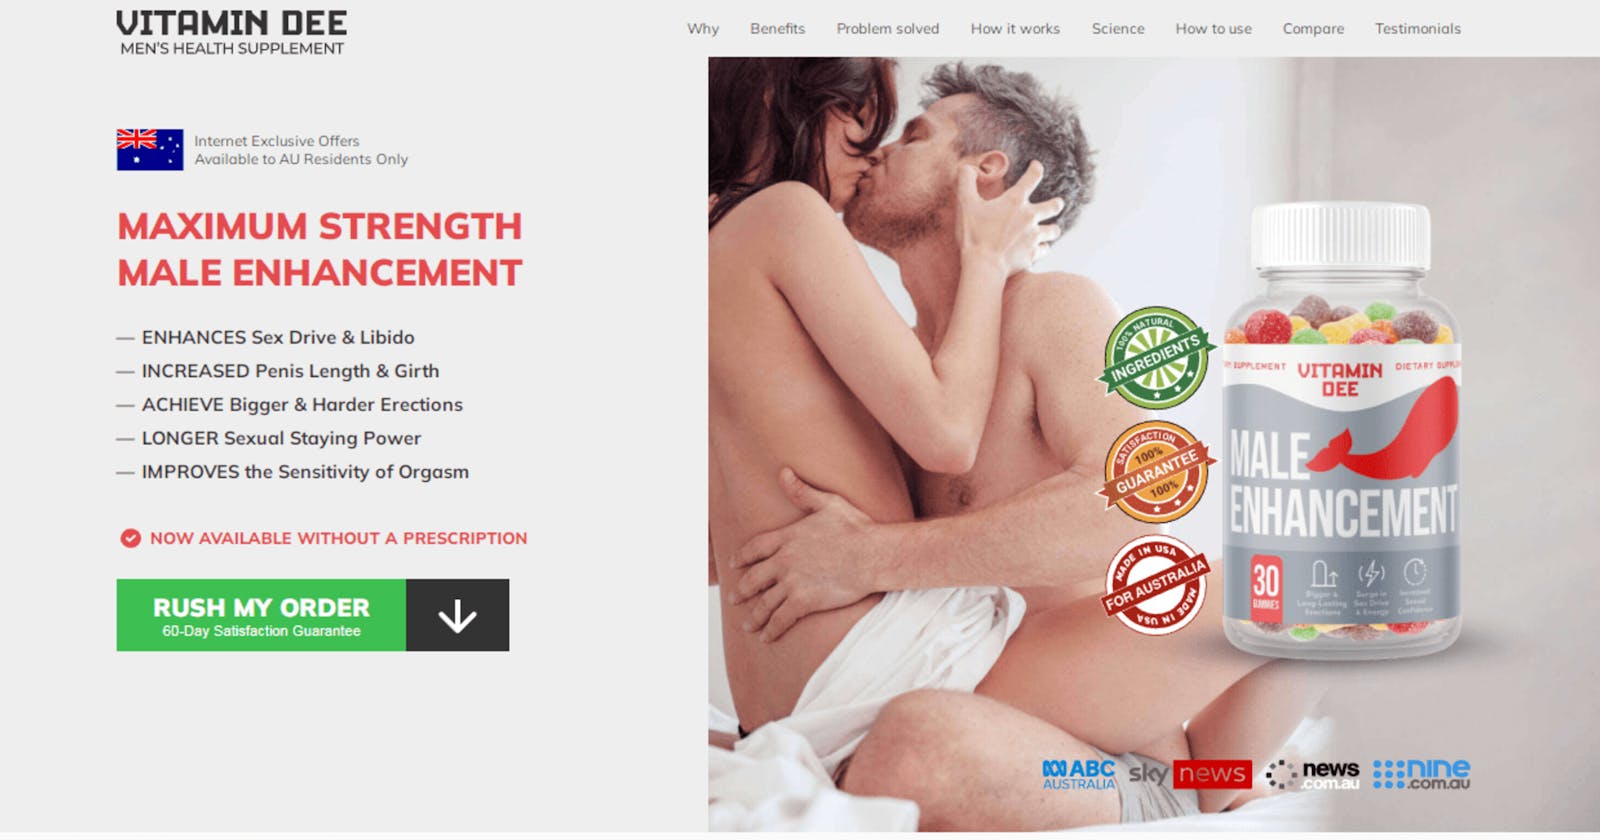 Vitamin Dee Male Enhancement Gummies Reviews (Male Growth Activator) Shocking Scam Really Works Report Read Ingredients That Works?